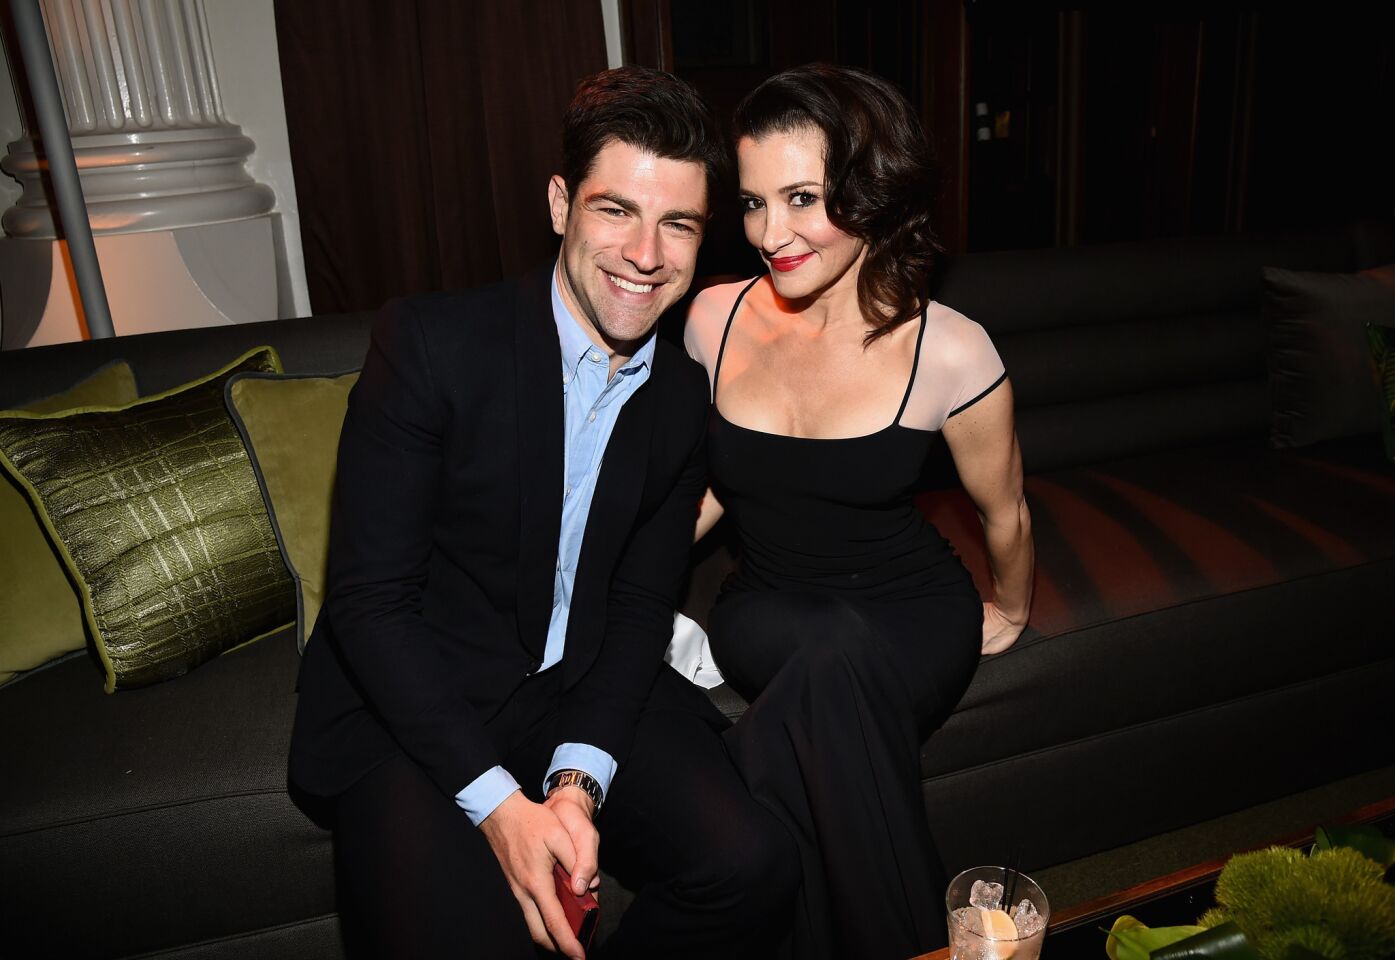 "New Girl" actor Max Greenfield and his wife, Tess Sanchez, are in for another round of sleepless nights -- they're expecting! The two are already parents to a little girl named Lilly, born in 2010.